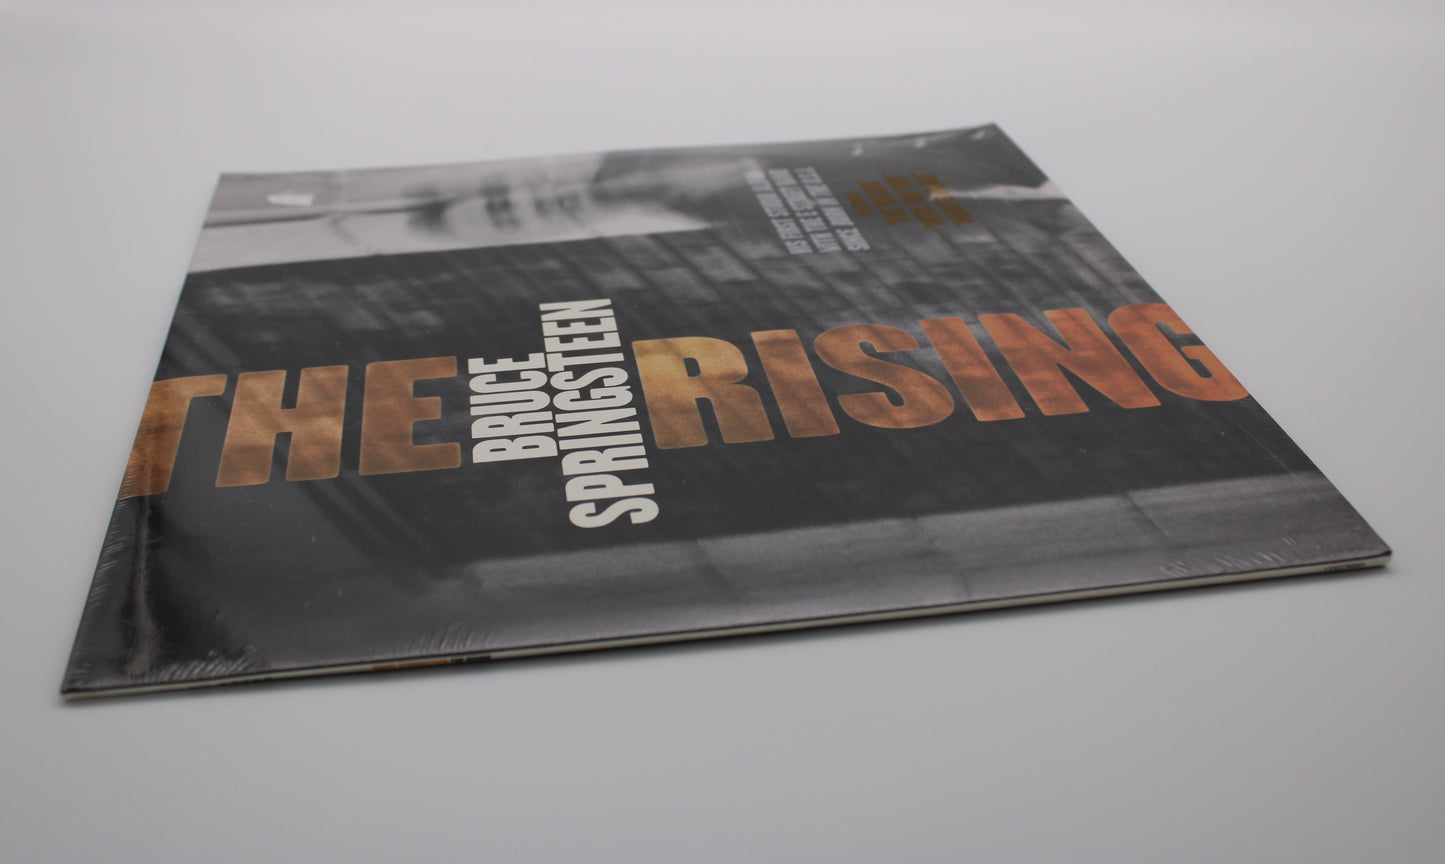 Bruce Springsteen The Rising Original Sealed 2002 Vinyl Release -Three 12" Records - Collectible